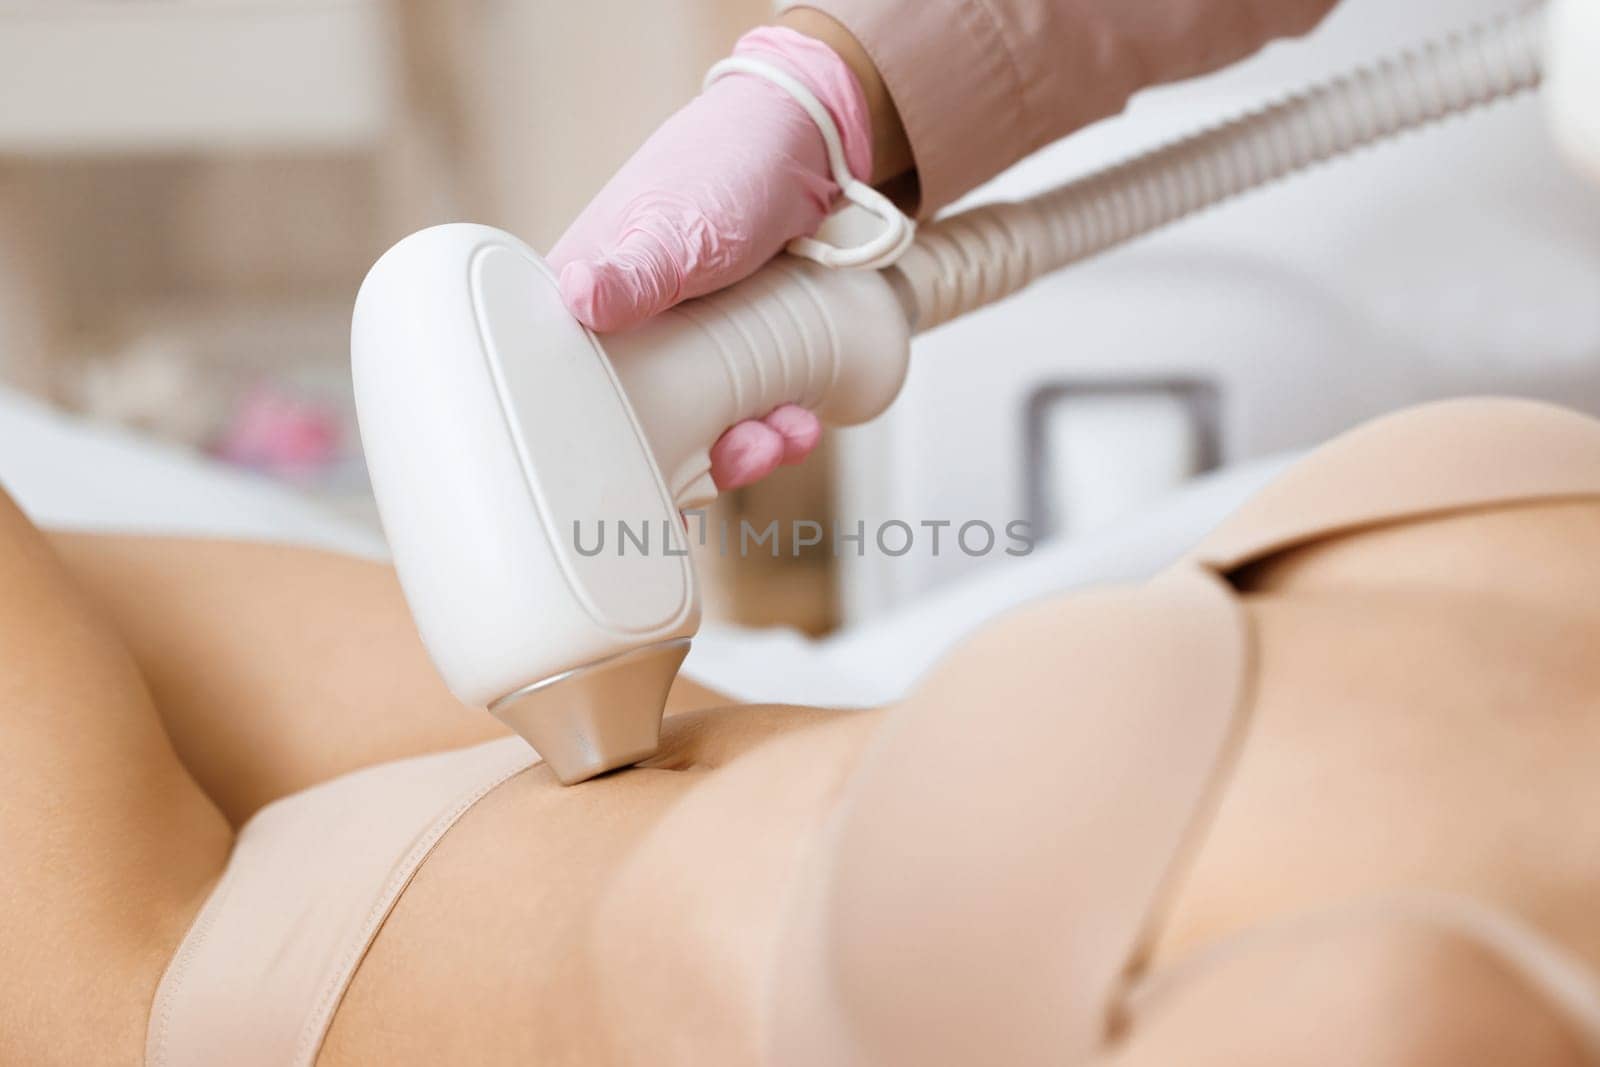 Laser in aesthetic medicine. Epilation. Woman on laser hair removal treatments thighs and bikini area. Beautician removes hair on bikini zone, using a laser. Receiving laser epilation on bikini zone. by uflypro